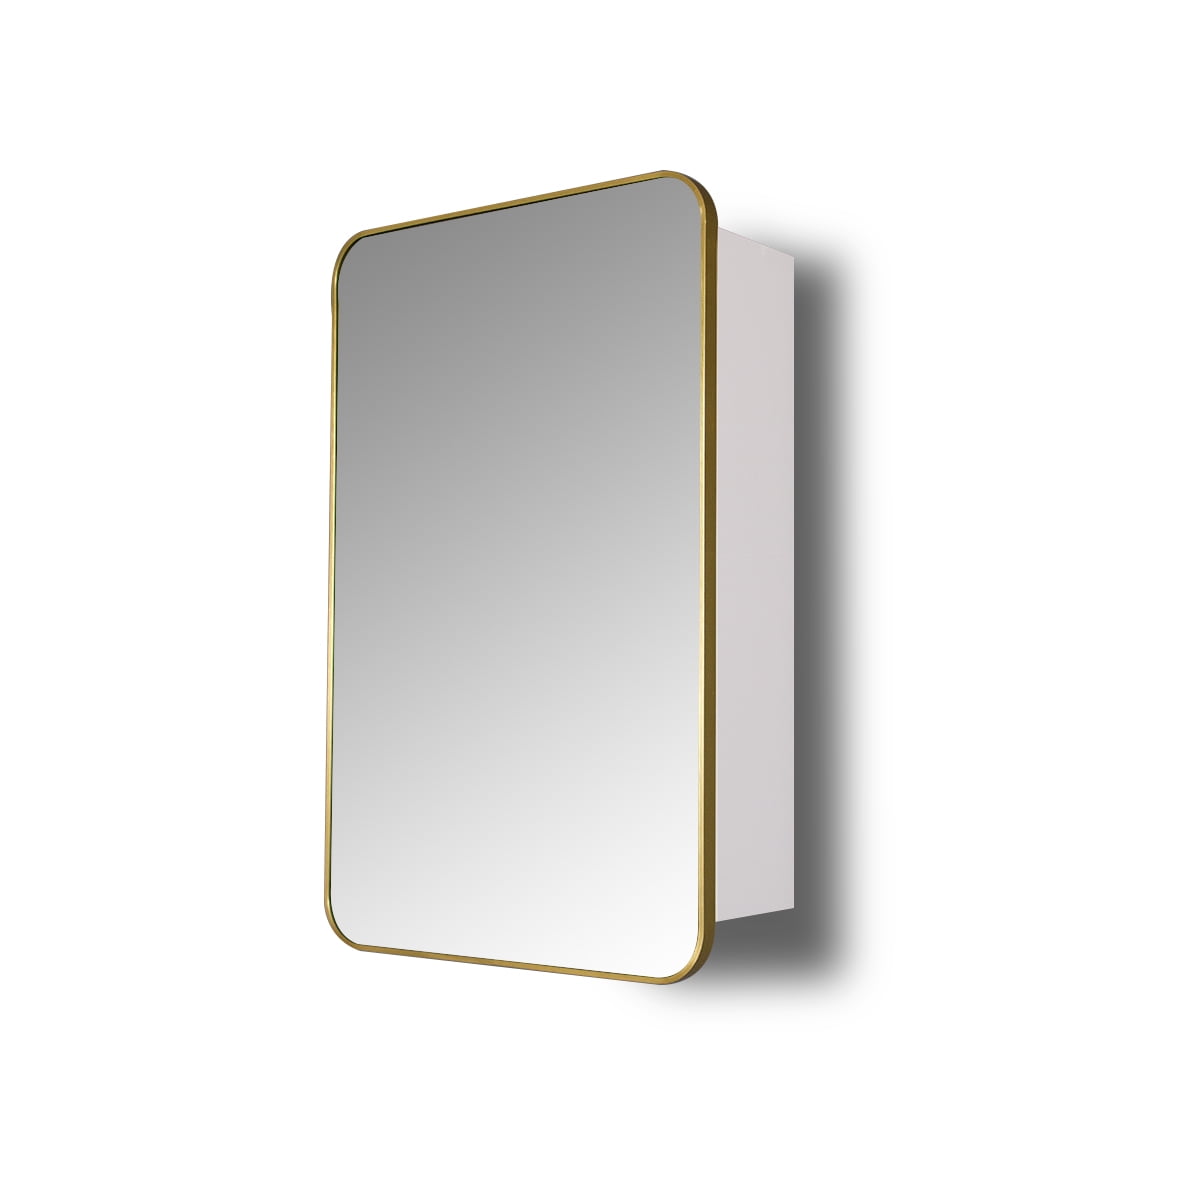 Better Homes Gardens Brushed Golden, Wall Mounted Medicine Cabinet With Mirror